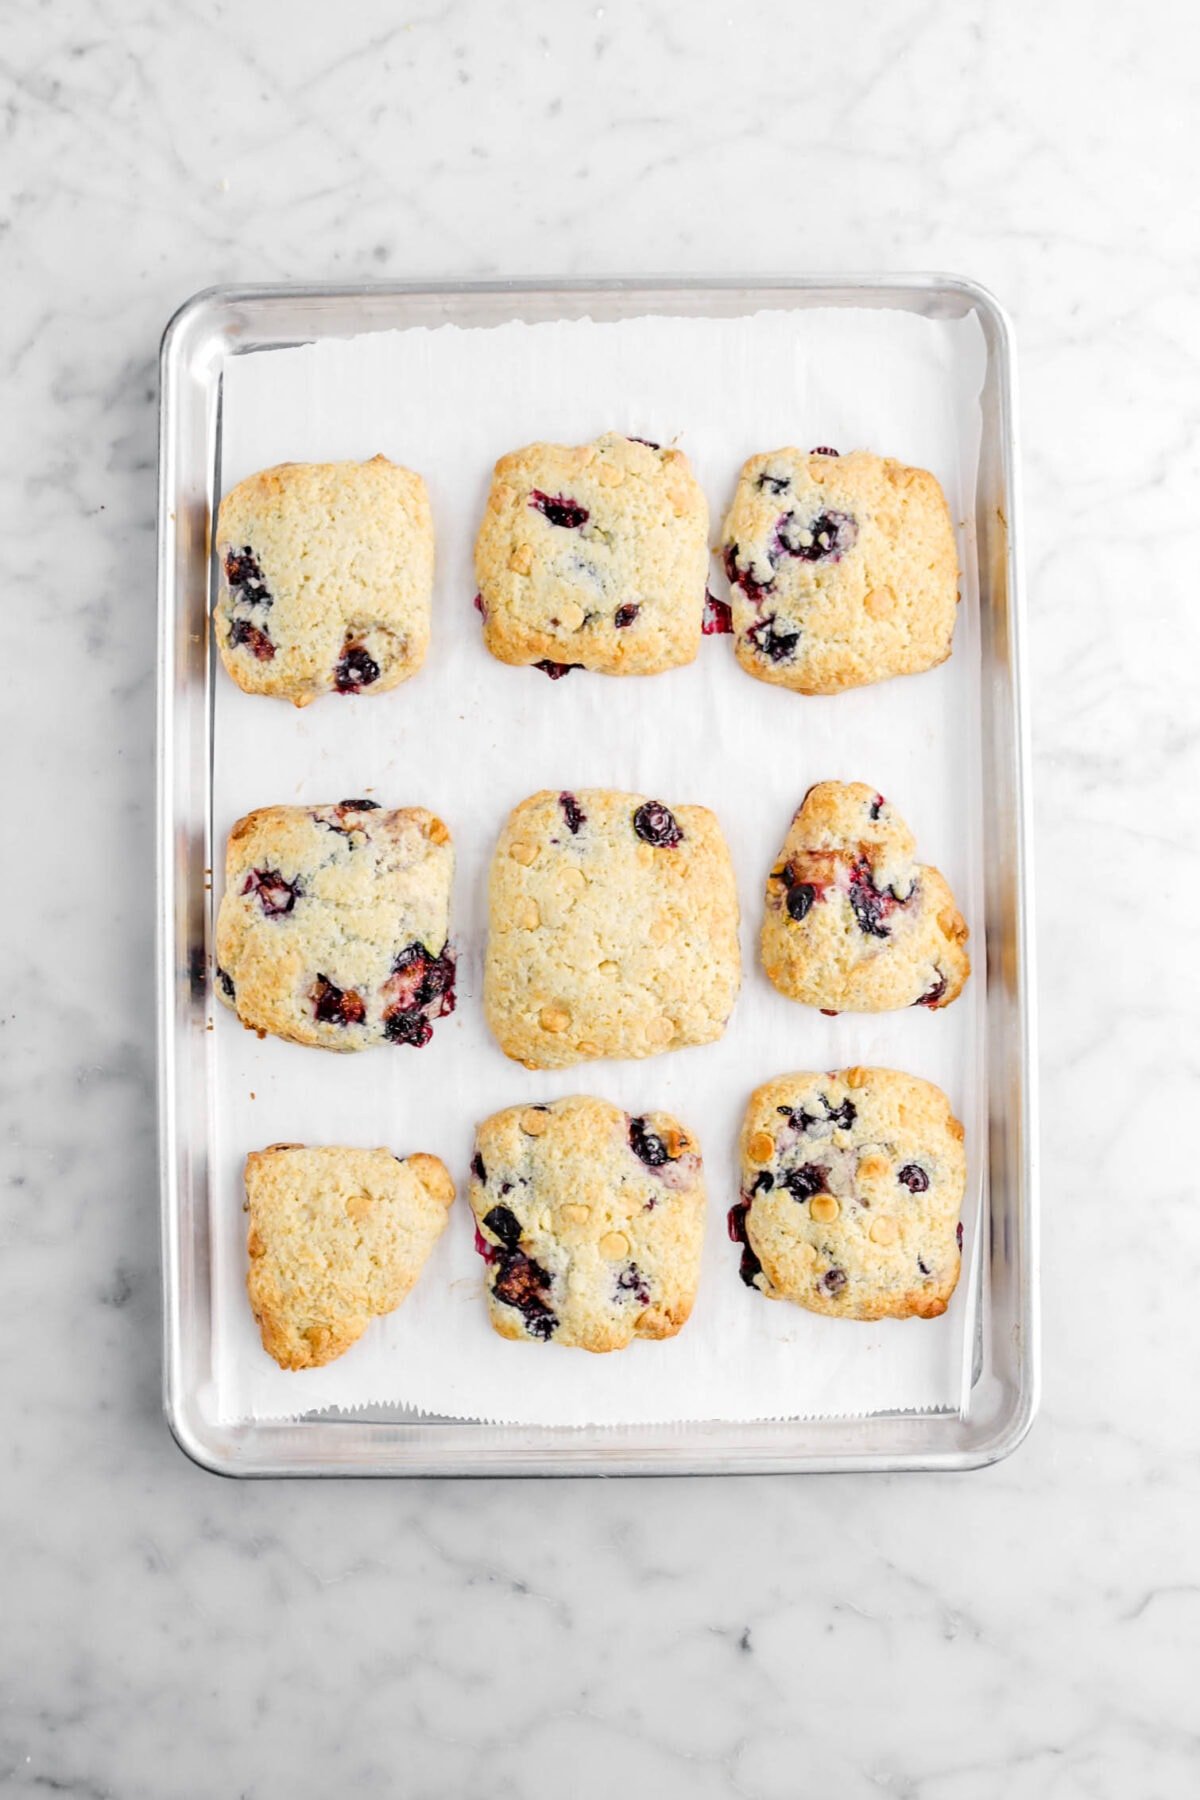 baked blueberry white chocolate scones on lined sheet pan.